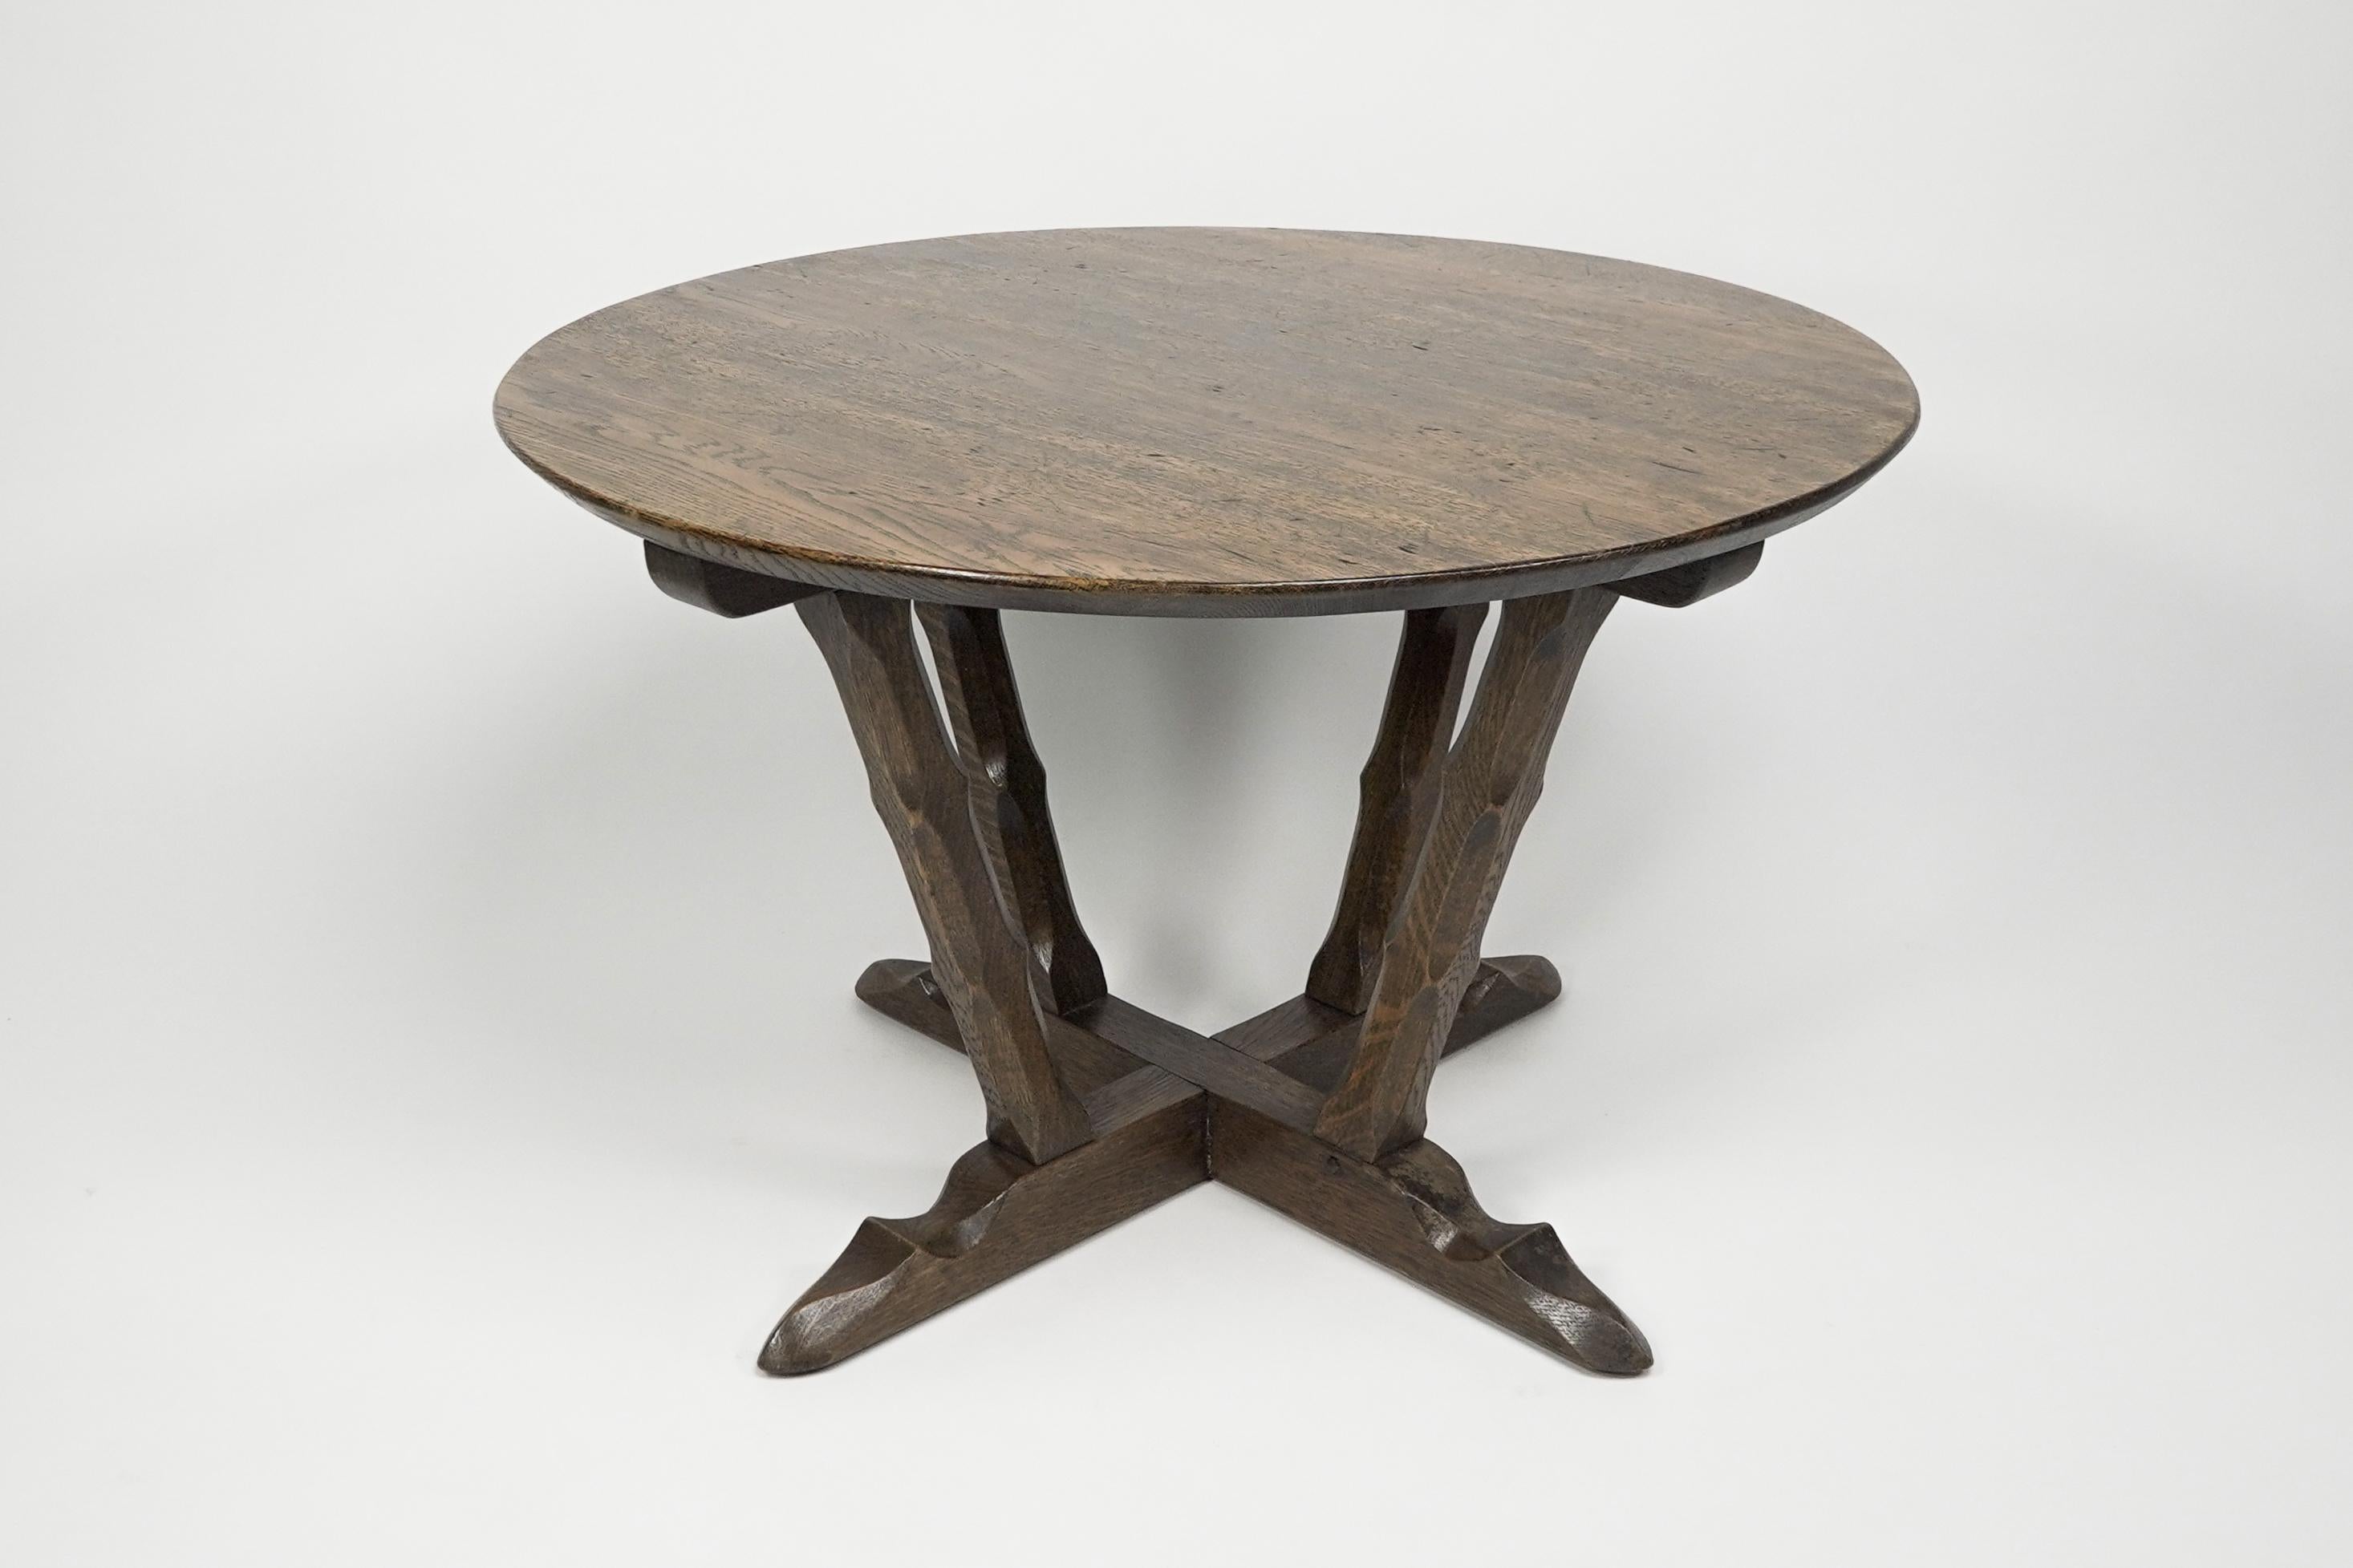 A late Arts and Crafts oak circular coffee table with deep sculptured chamfered details raised on angular legs that united to a cross stretcher footed base. 
Made by Rupert Griffiths of the Monastic Woodcraft Furniture Company.